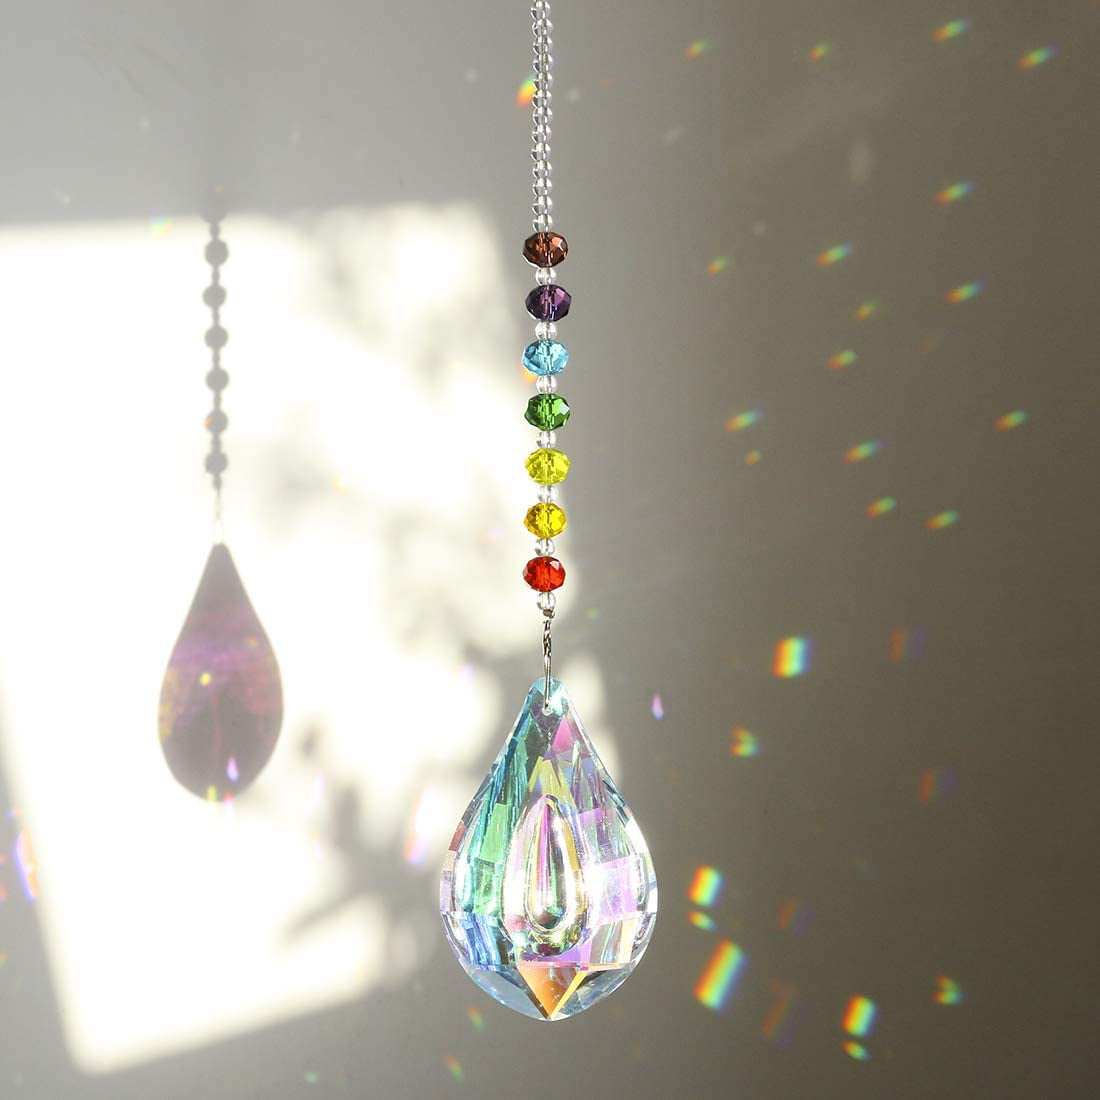 Crystal Glass & Stainless Steel Hanging Suncatcher Mobile-Home 50cm Long 